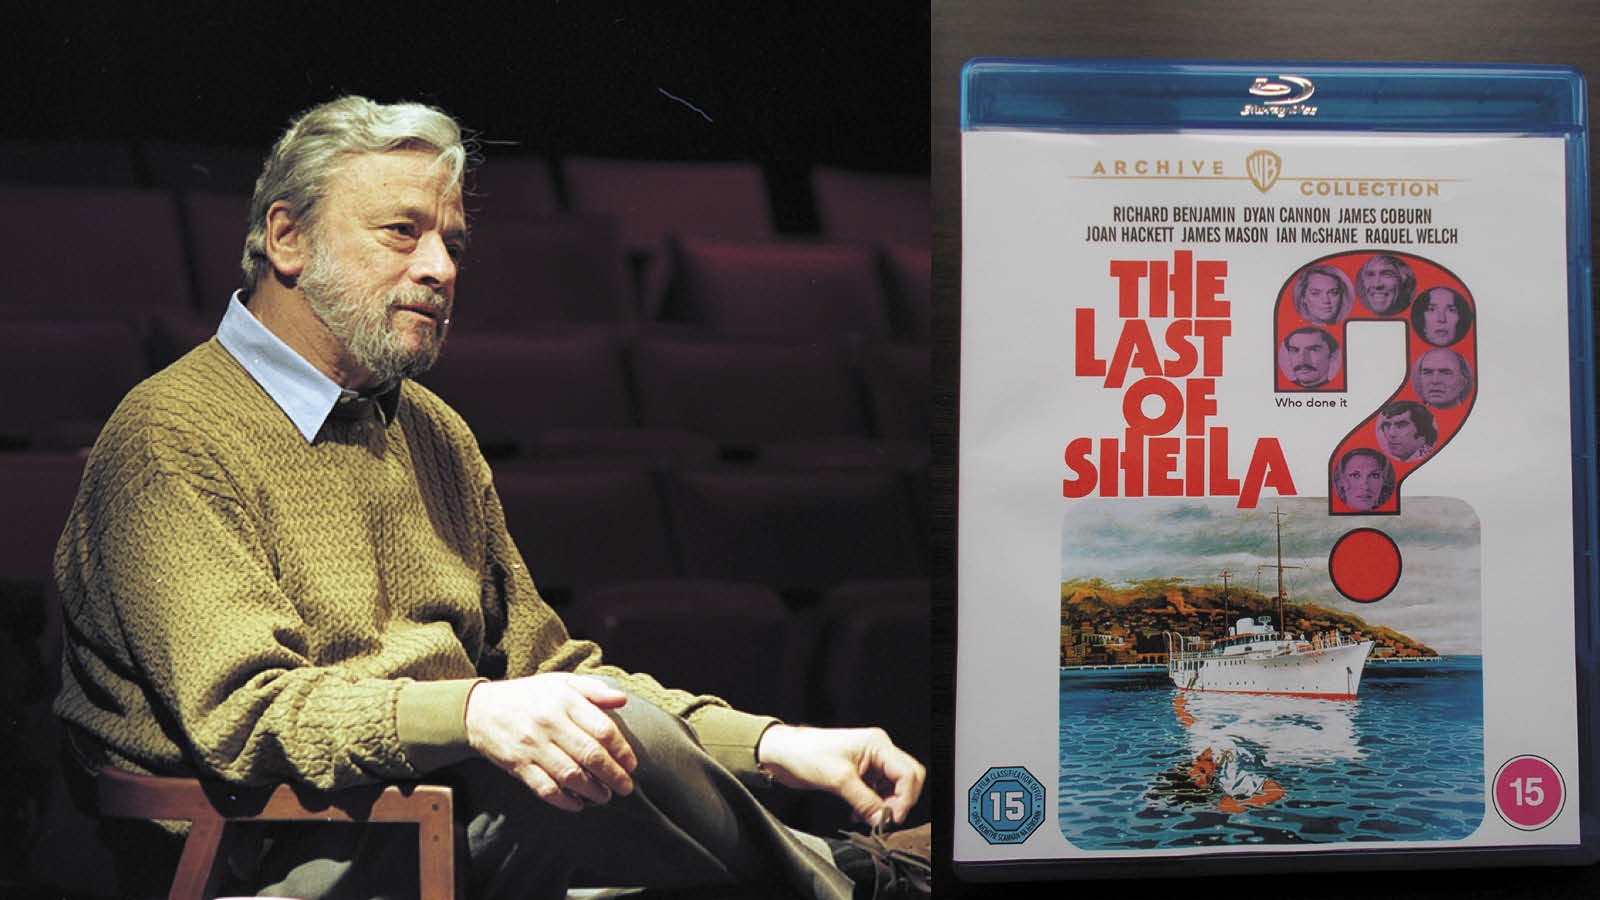 Stephen Sondheim and DVD blu-ray cover of The Last of Sheila